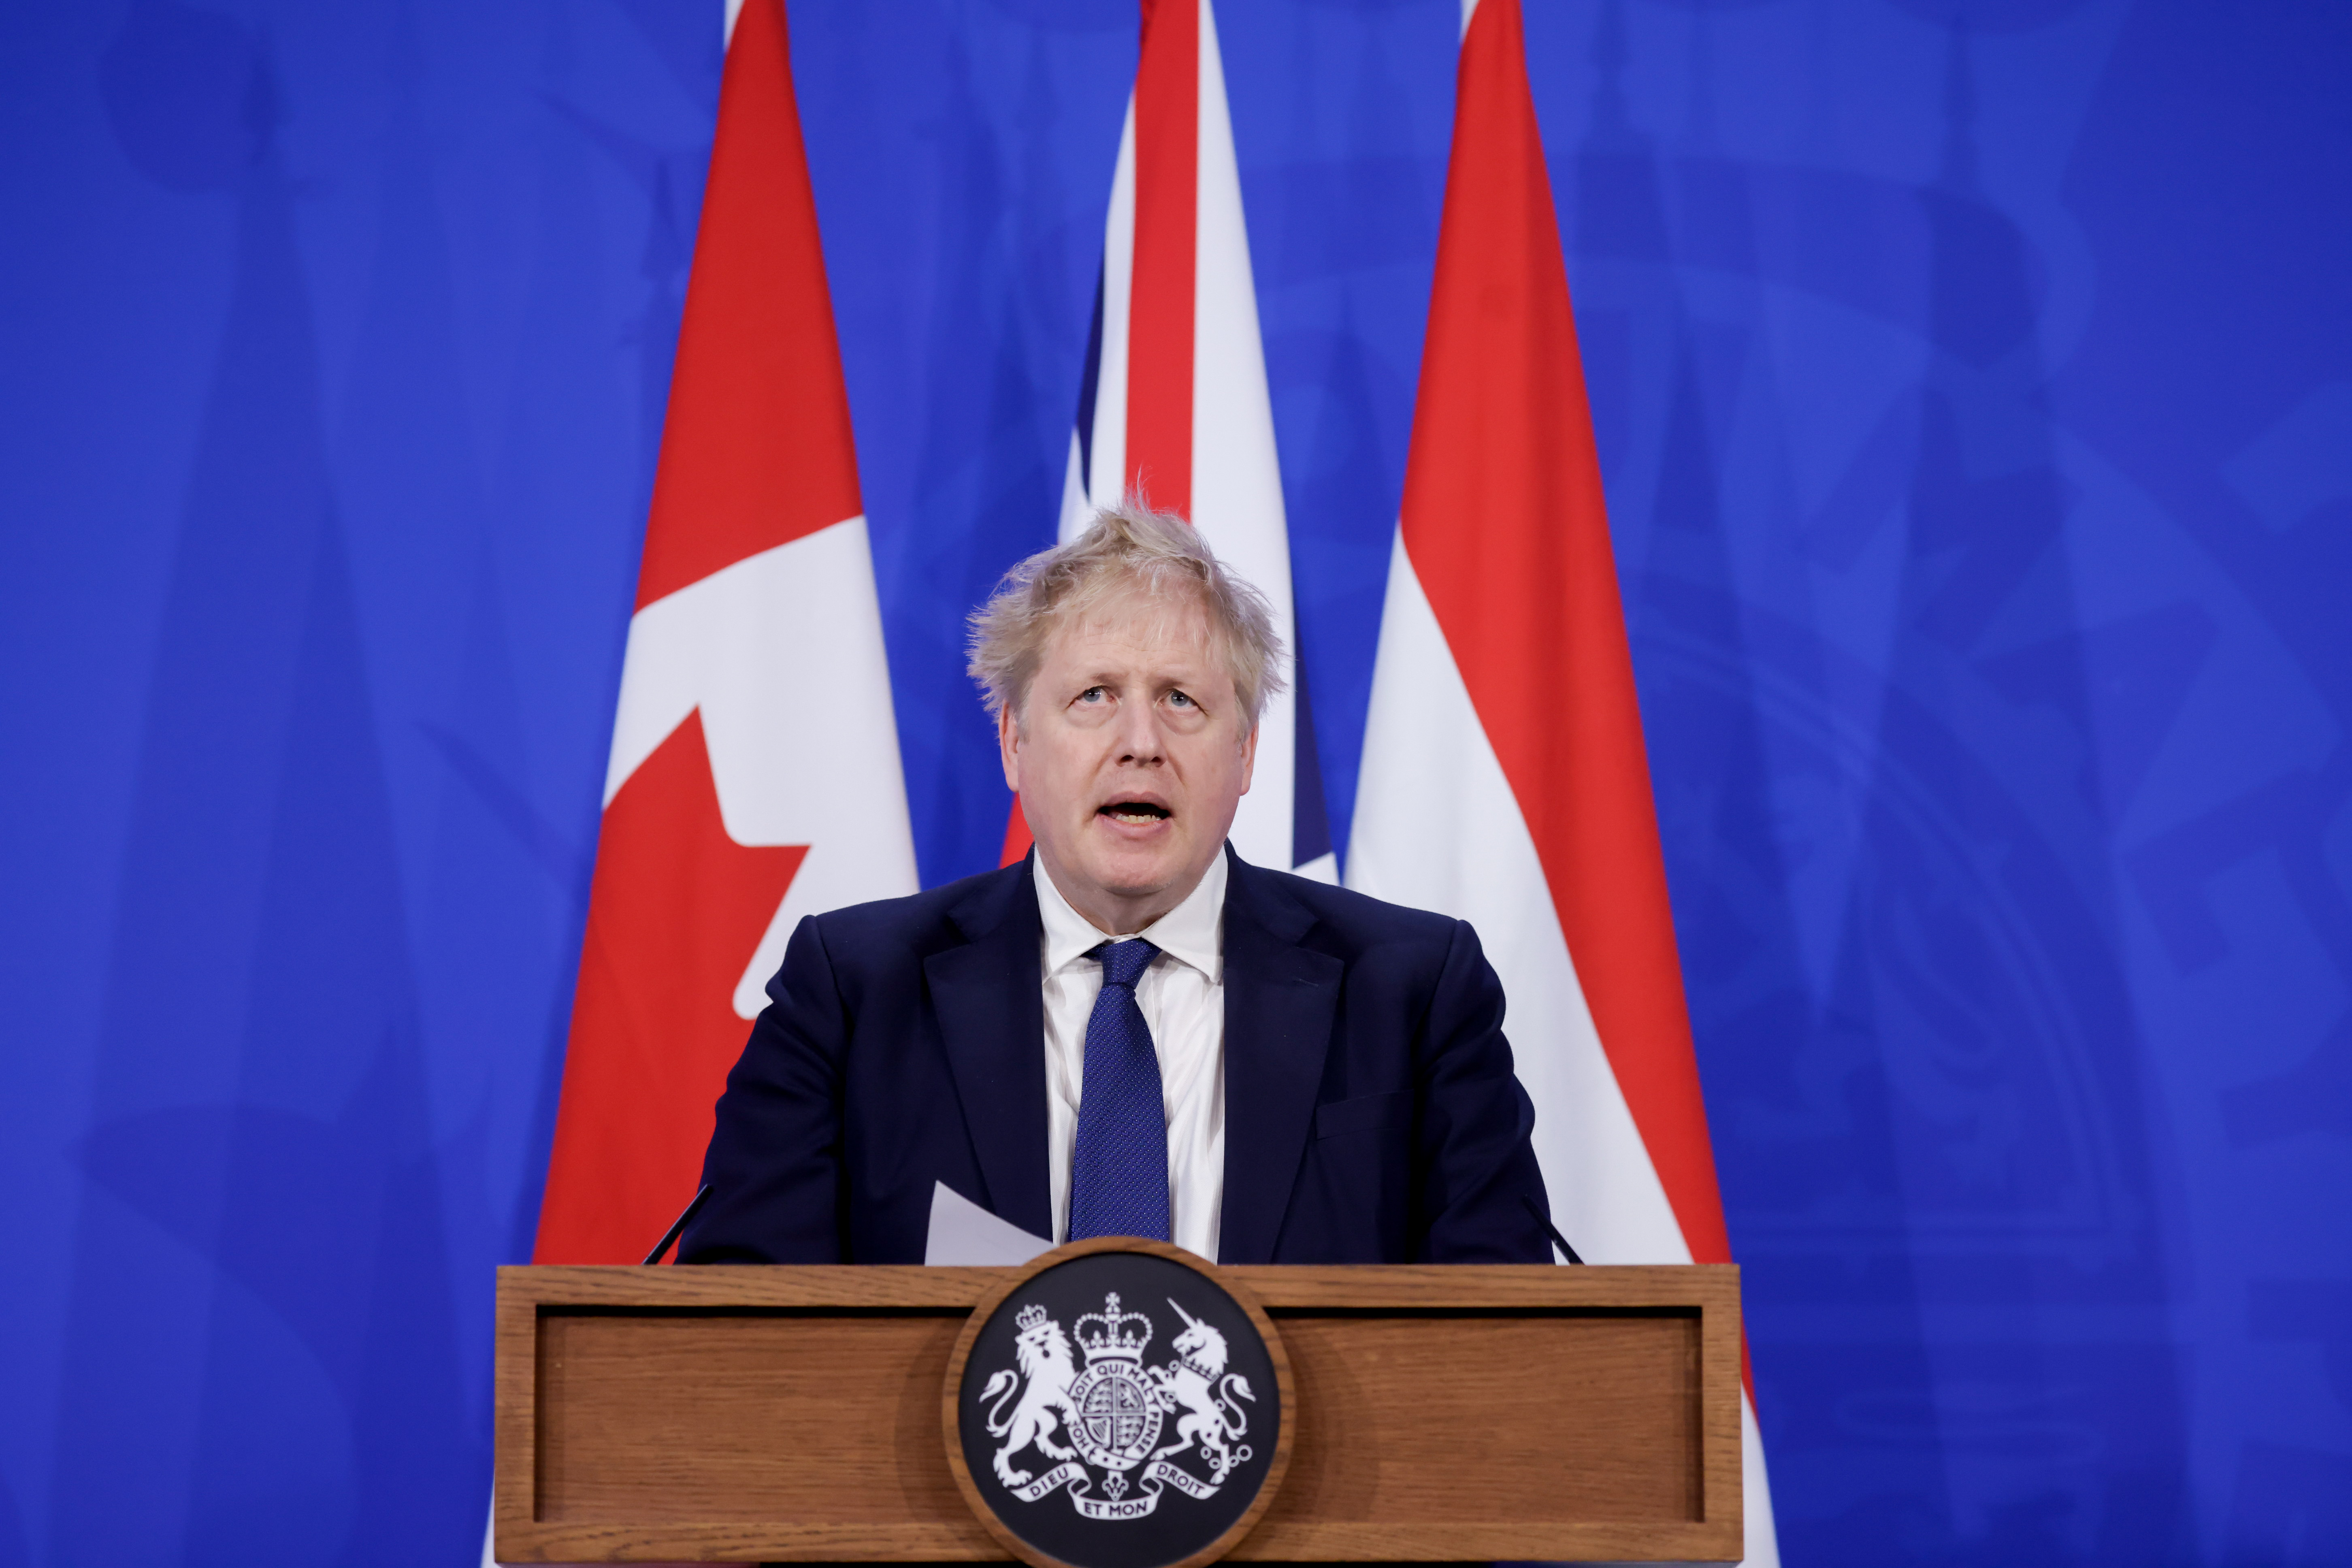 Boris Johnson, U.K. prime minister, speaks during a joint news conference with Justin Trudeau, Canada's prime minister, and Mark Rutte, Netherland's prime minister, on the war in Ukraine, in London, on March 7.